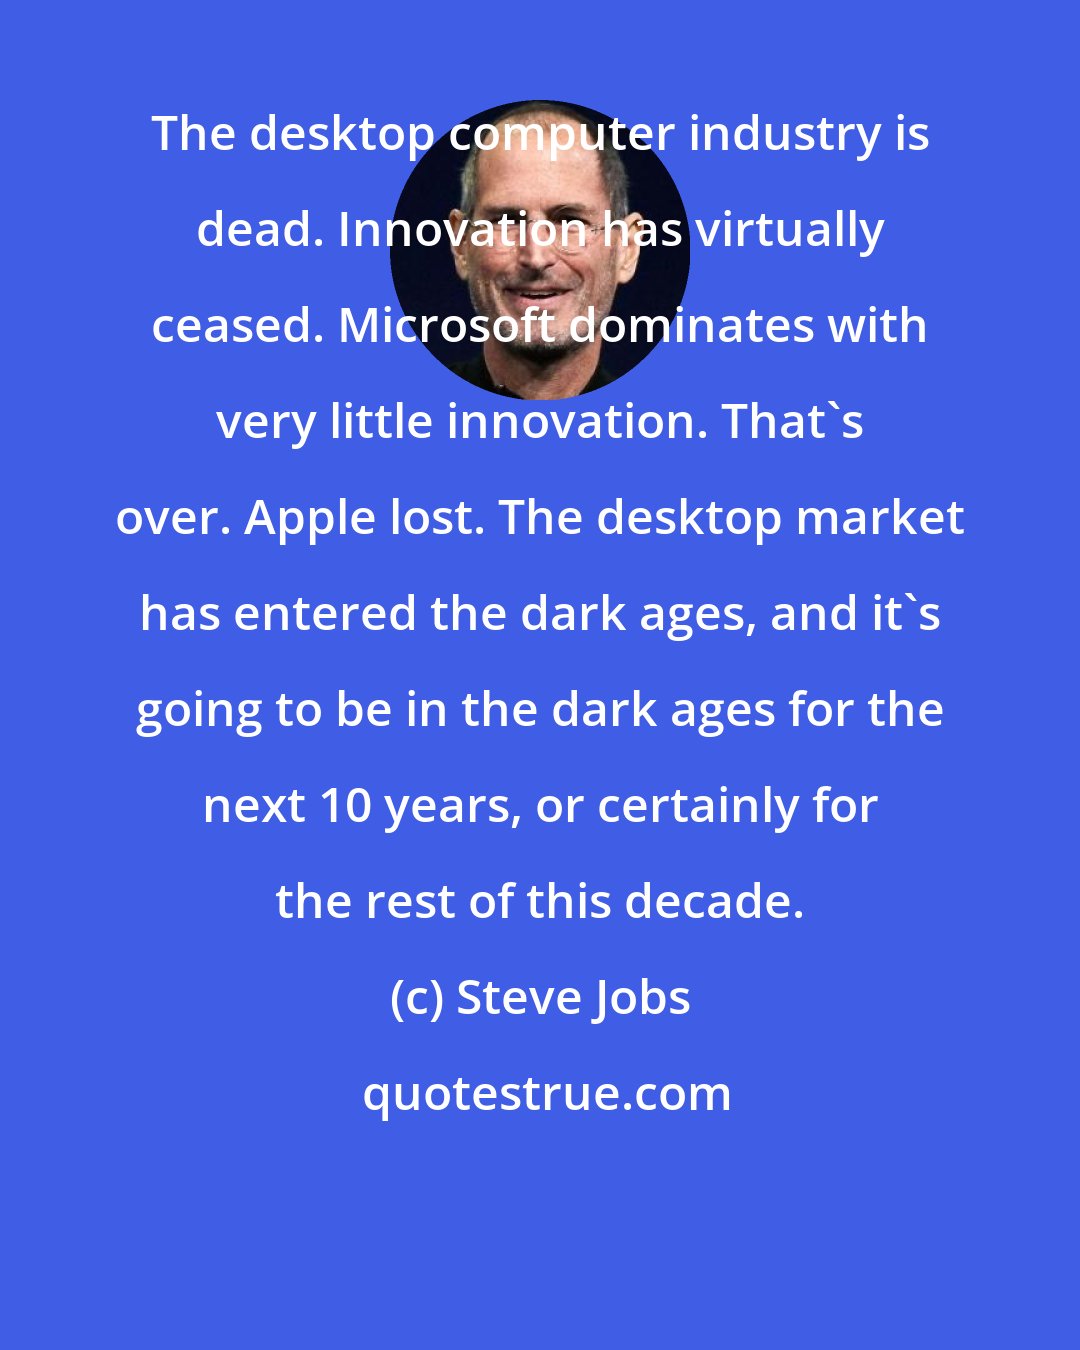 Steve Jobs: The desktop computer industry is dead. Innovation has virtually ceased. Microsoft dominates with very little innovation. That's over. Apple lost. The desktop market has entered the dark ages, and it's going to be in the dark ages for the next 10 years, or certainly for the rest of this decade.